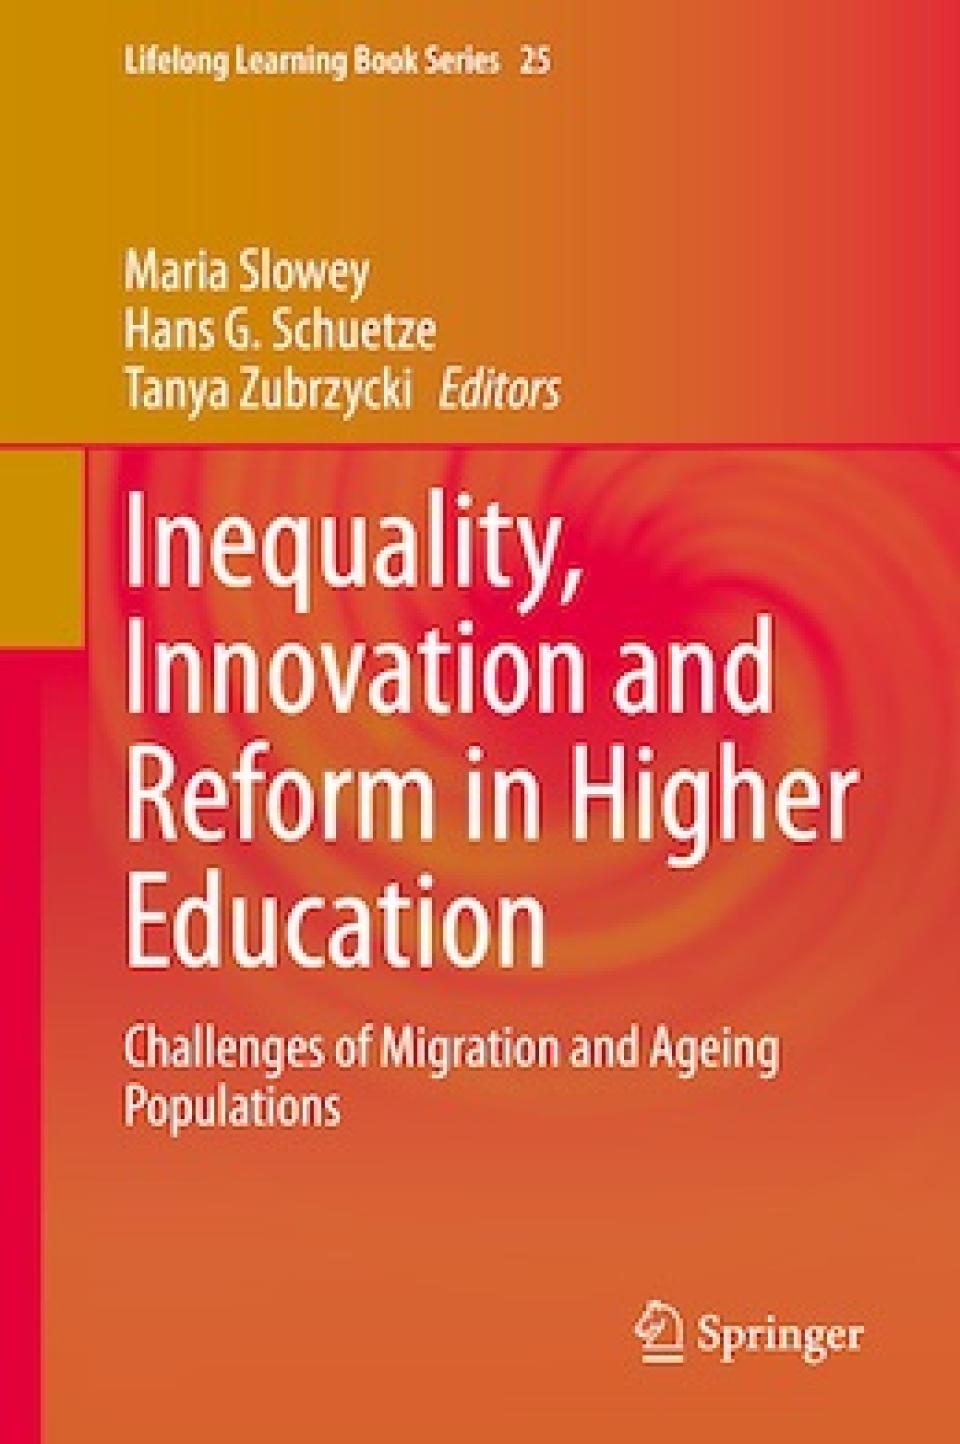 HERC is delighted to announce that the book "Inequality, innovation and reform in higher education: Challenges of migration and ageing populations" edited by Professor Maria Slowey, Professor Hans Schuetze and Tanya Zubrzycki is among the top used publications on SpringerLink that address UN Sustainable Development Goals on Quality Education and Reduced Inequalities.  This month it was also chosen for a free pdf download of Chapter 1 (until December 12, 2020), please see https://link.springer.com/book/10.10